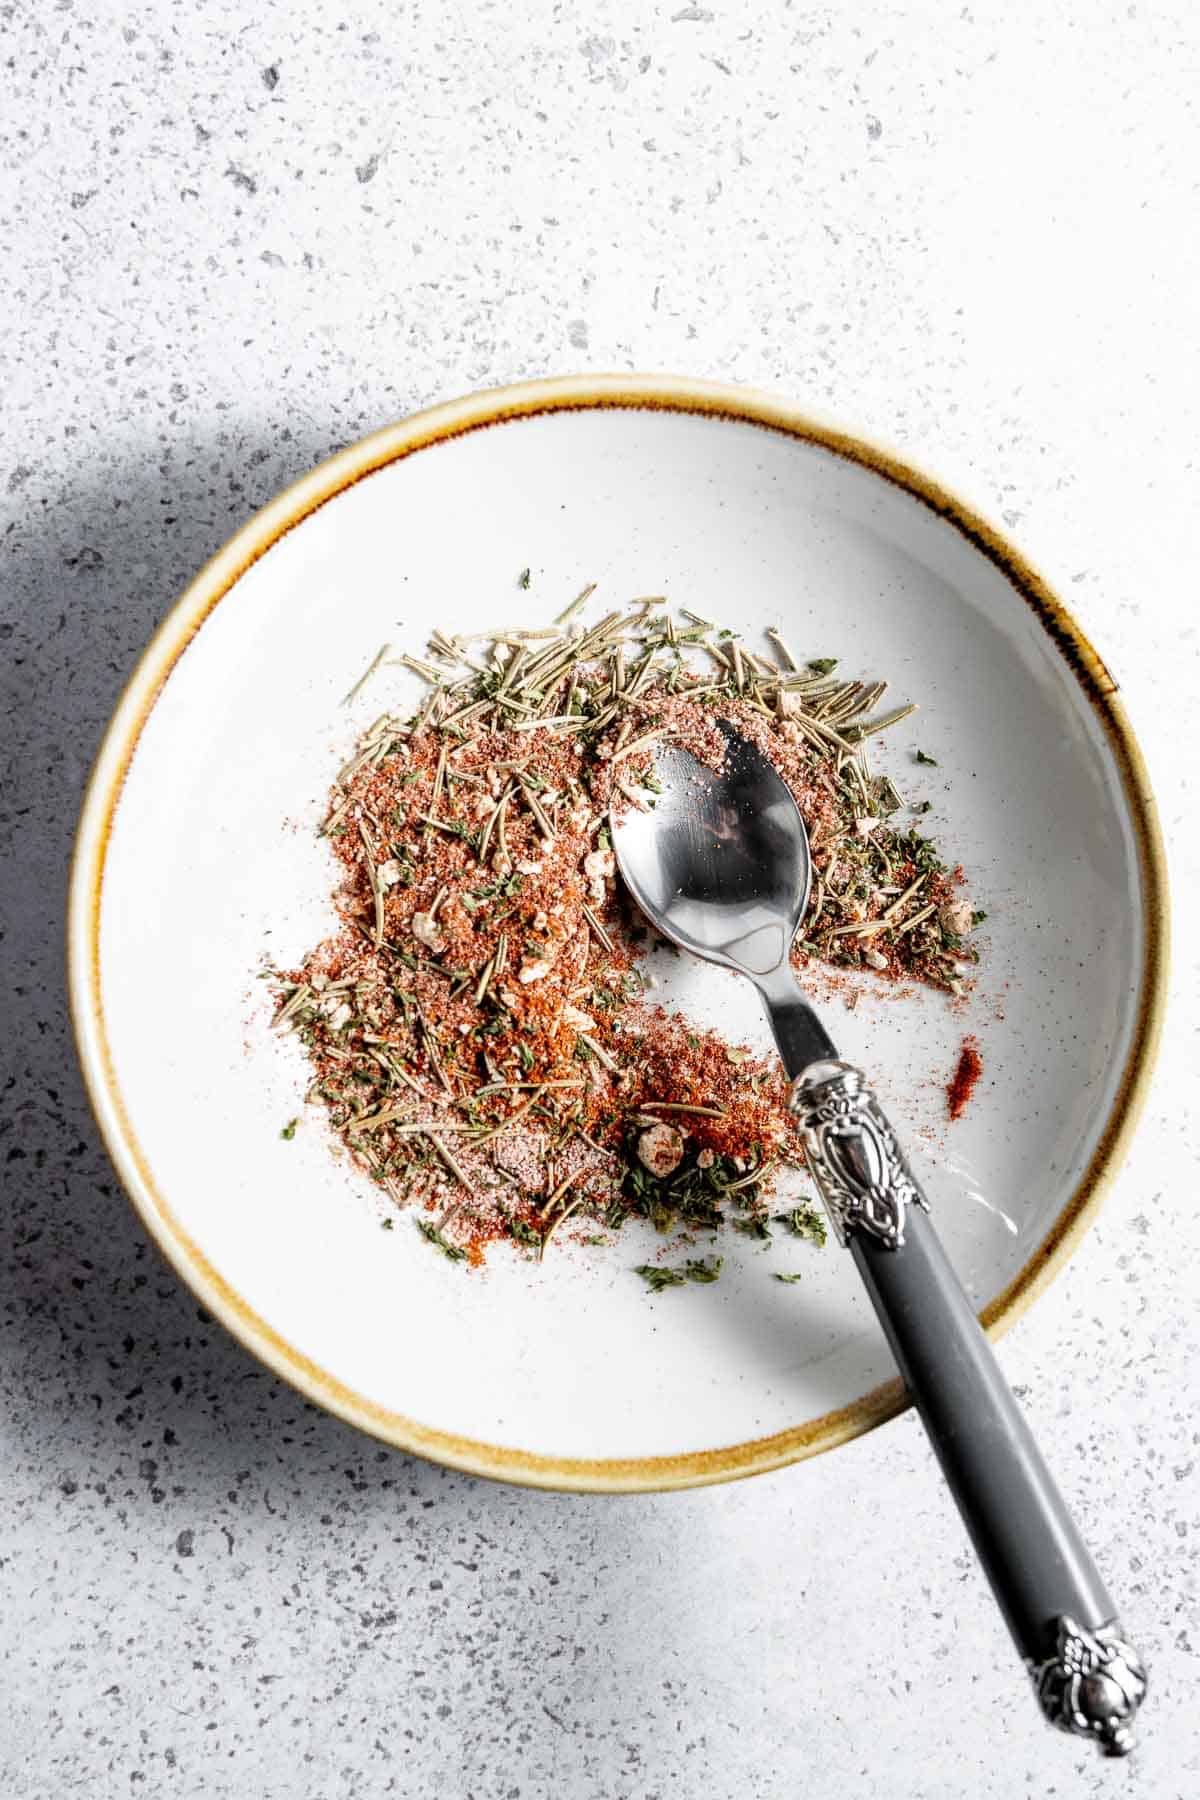 A white bowl with a spoon and herbs in it.